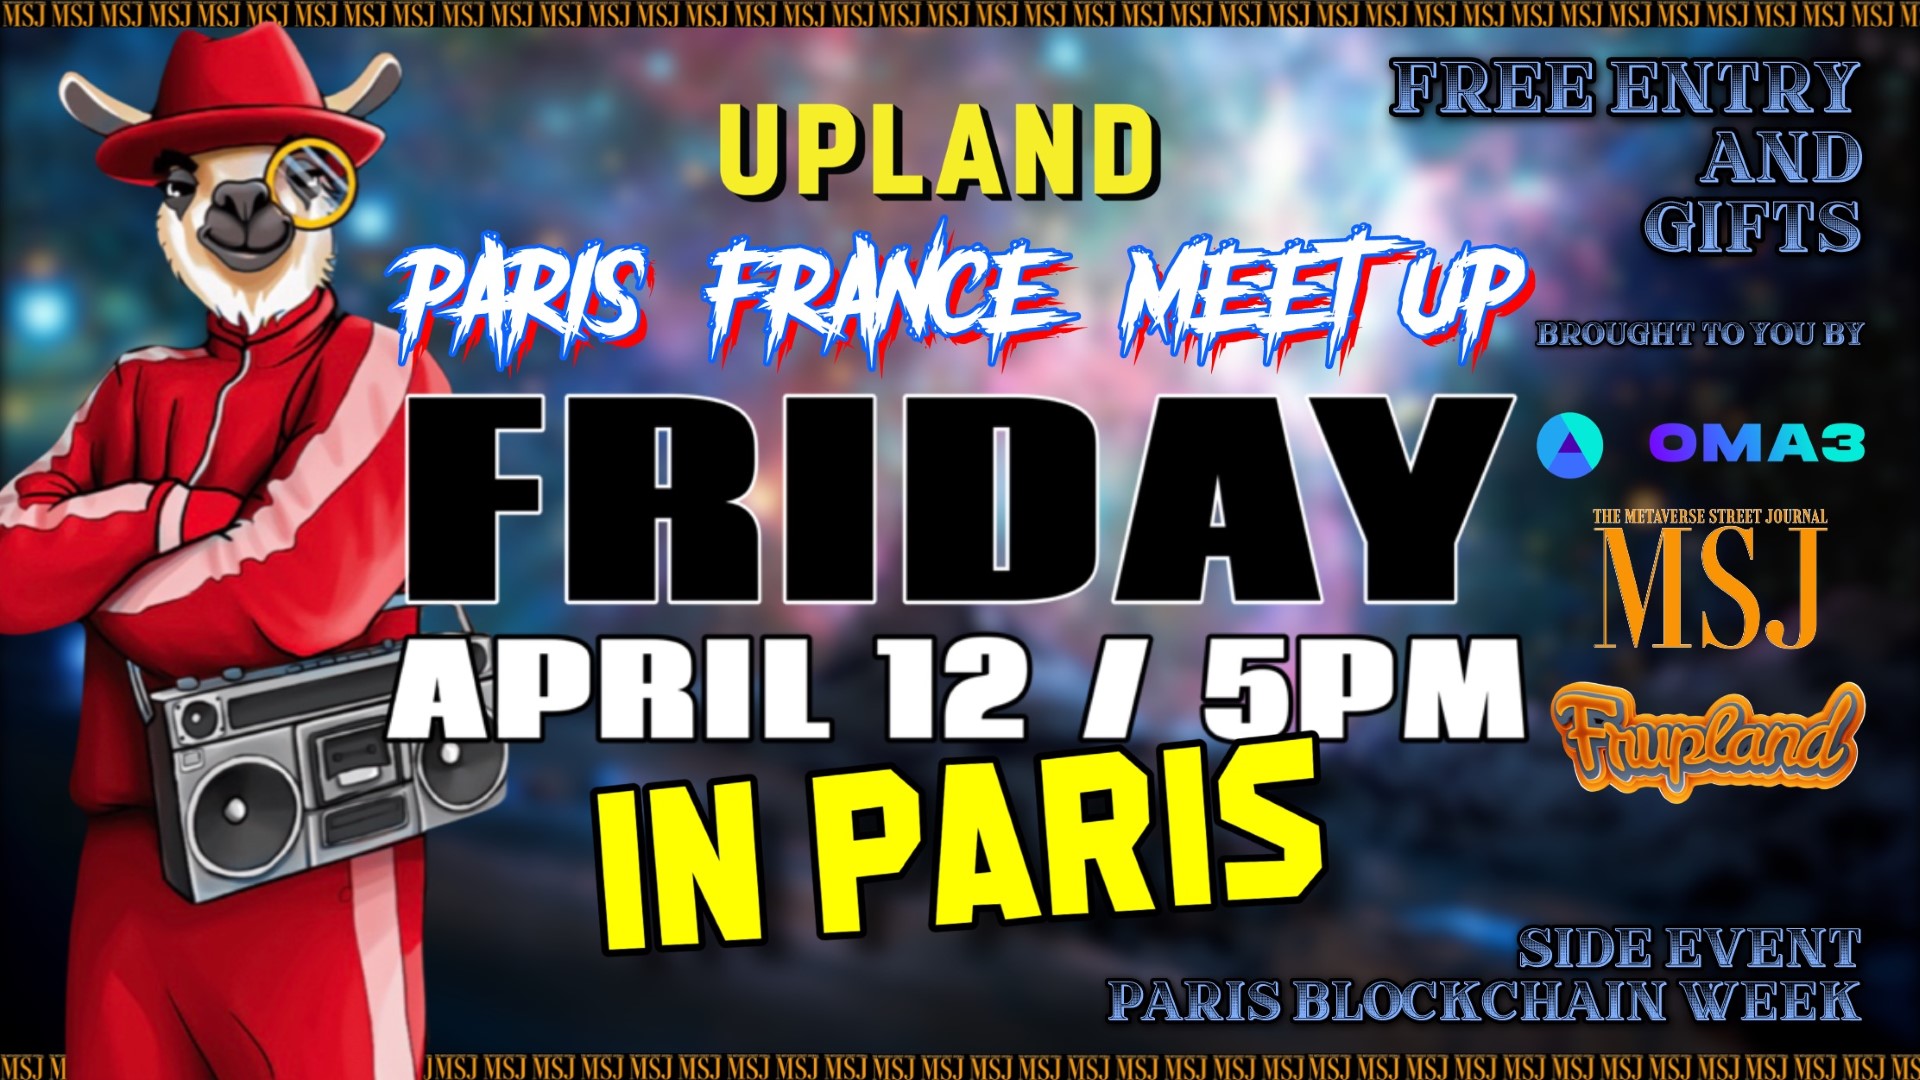 Upland Paris Meetup by MSJ and Frupland ft. Dr. Dirk Lueth, OMA3, and giveaway prizes to all attendees